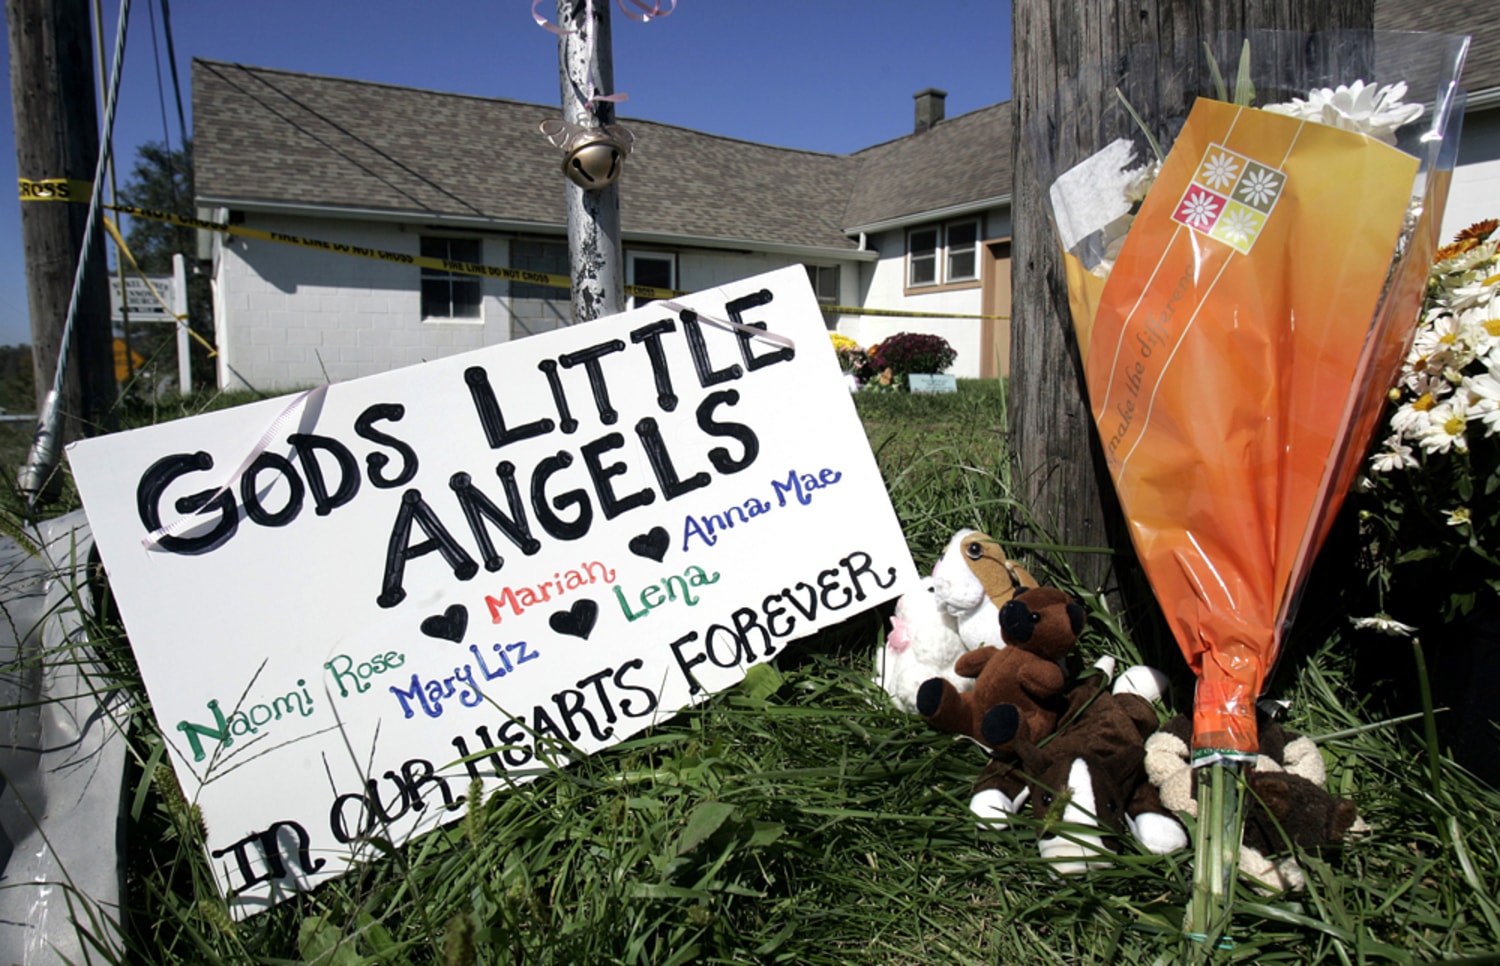 Church bells toll for five Amish girls who died